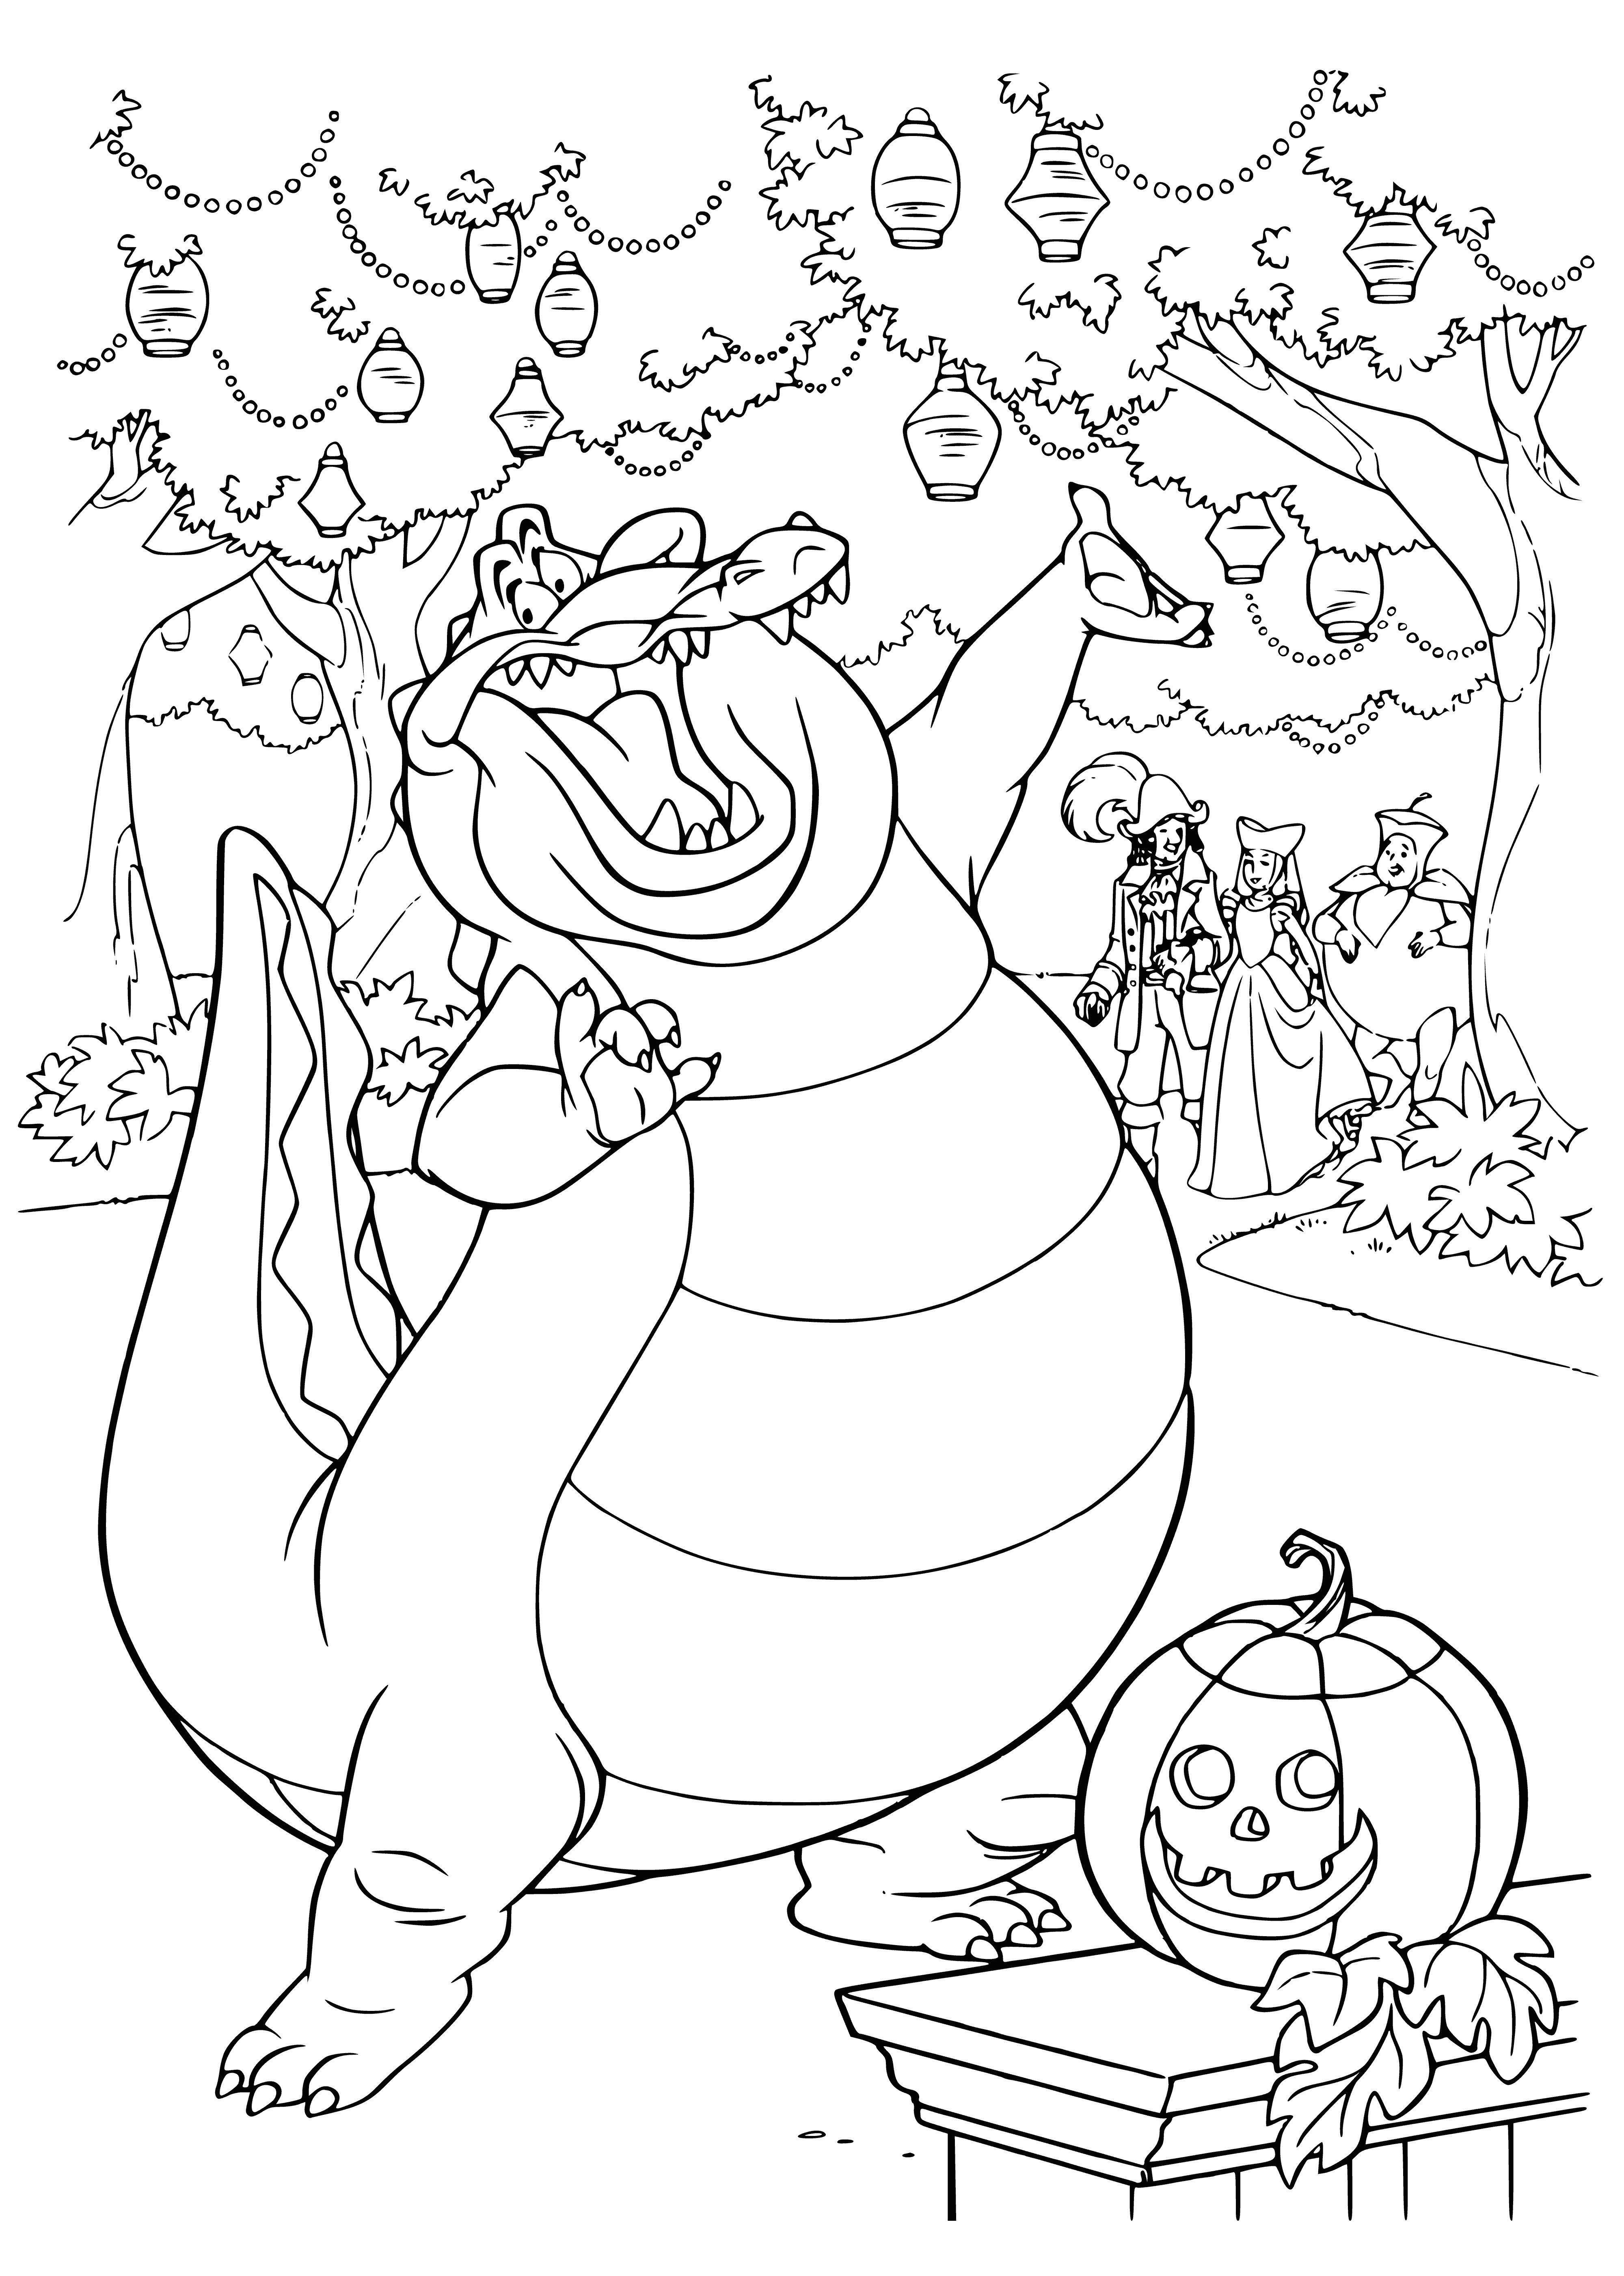 Halloween party coloring page